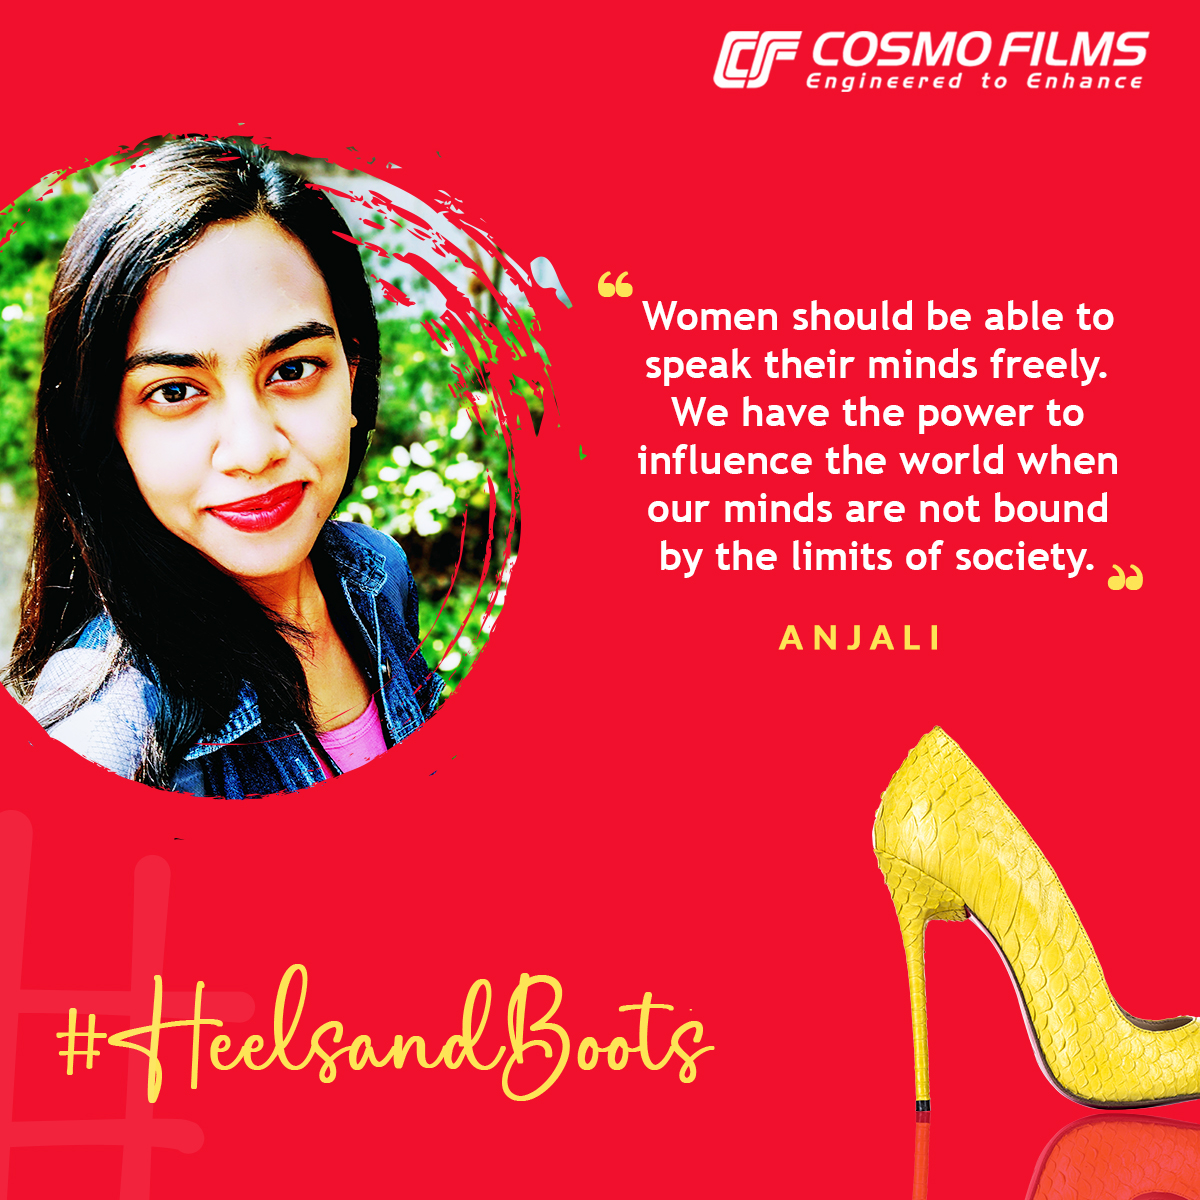 #WednesdayWithCosmoLadies
A limitless mind can make the biggest difference. Keeping that in mind, Anjali talks about the importance of the ability to think & speak freely.
Read what she has to say.
#HeelsAndBoots #WomenAtCosmo #Women #WomanSpeaks #SpeakUp #Womanhood #WorkingWomen